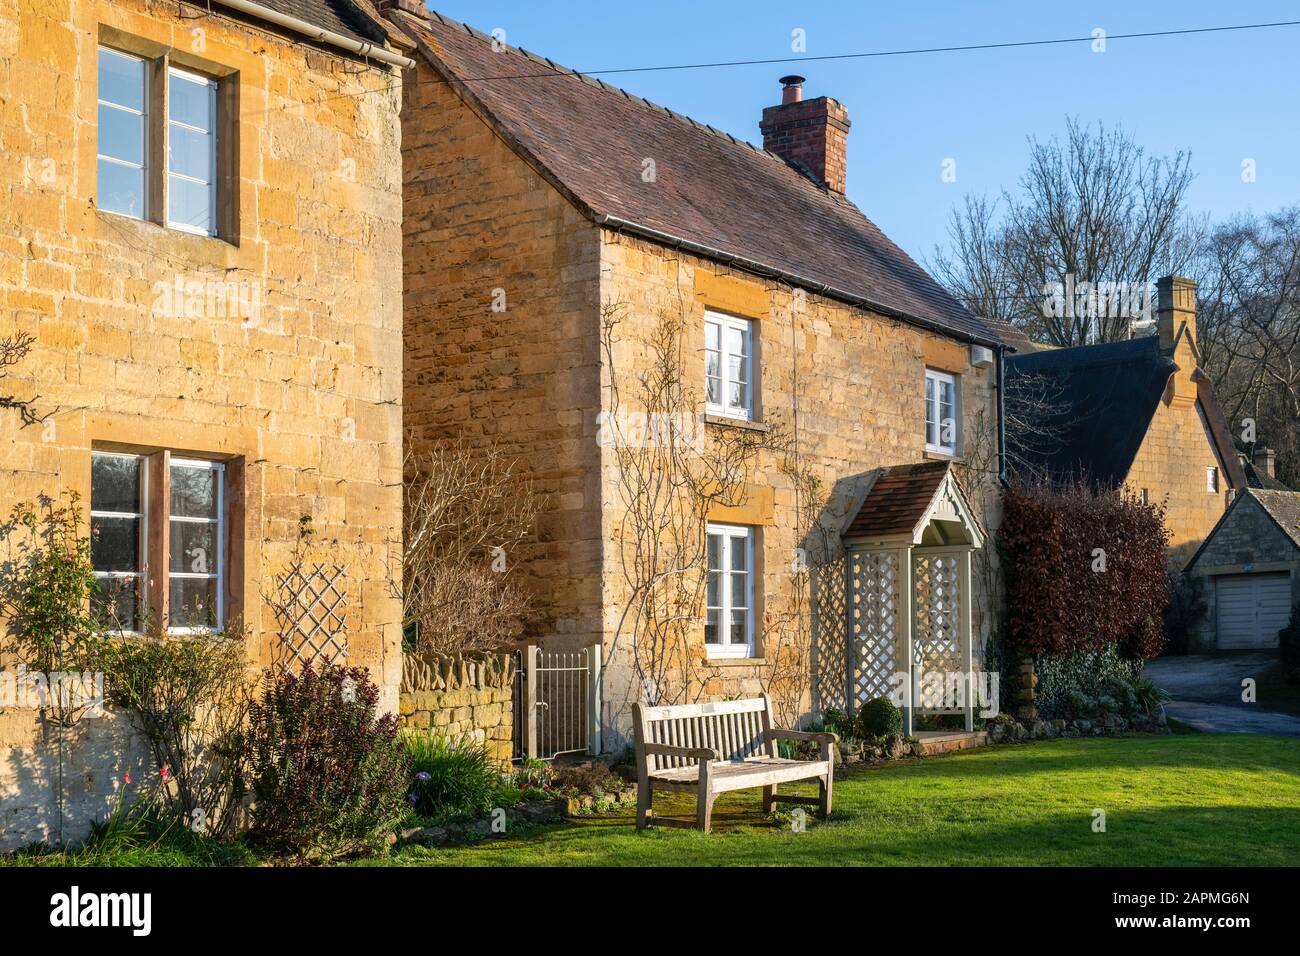 Cotswold cottage in pietra in inverno luce del sole al tramonto. Stanton, Cotswolds, Gloucestershire, Inghilterra Foto Stock